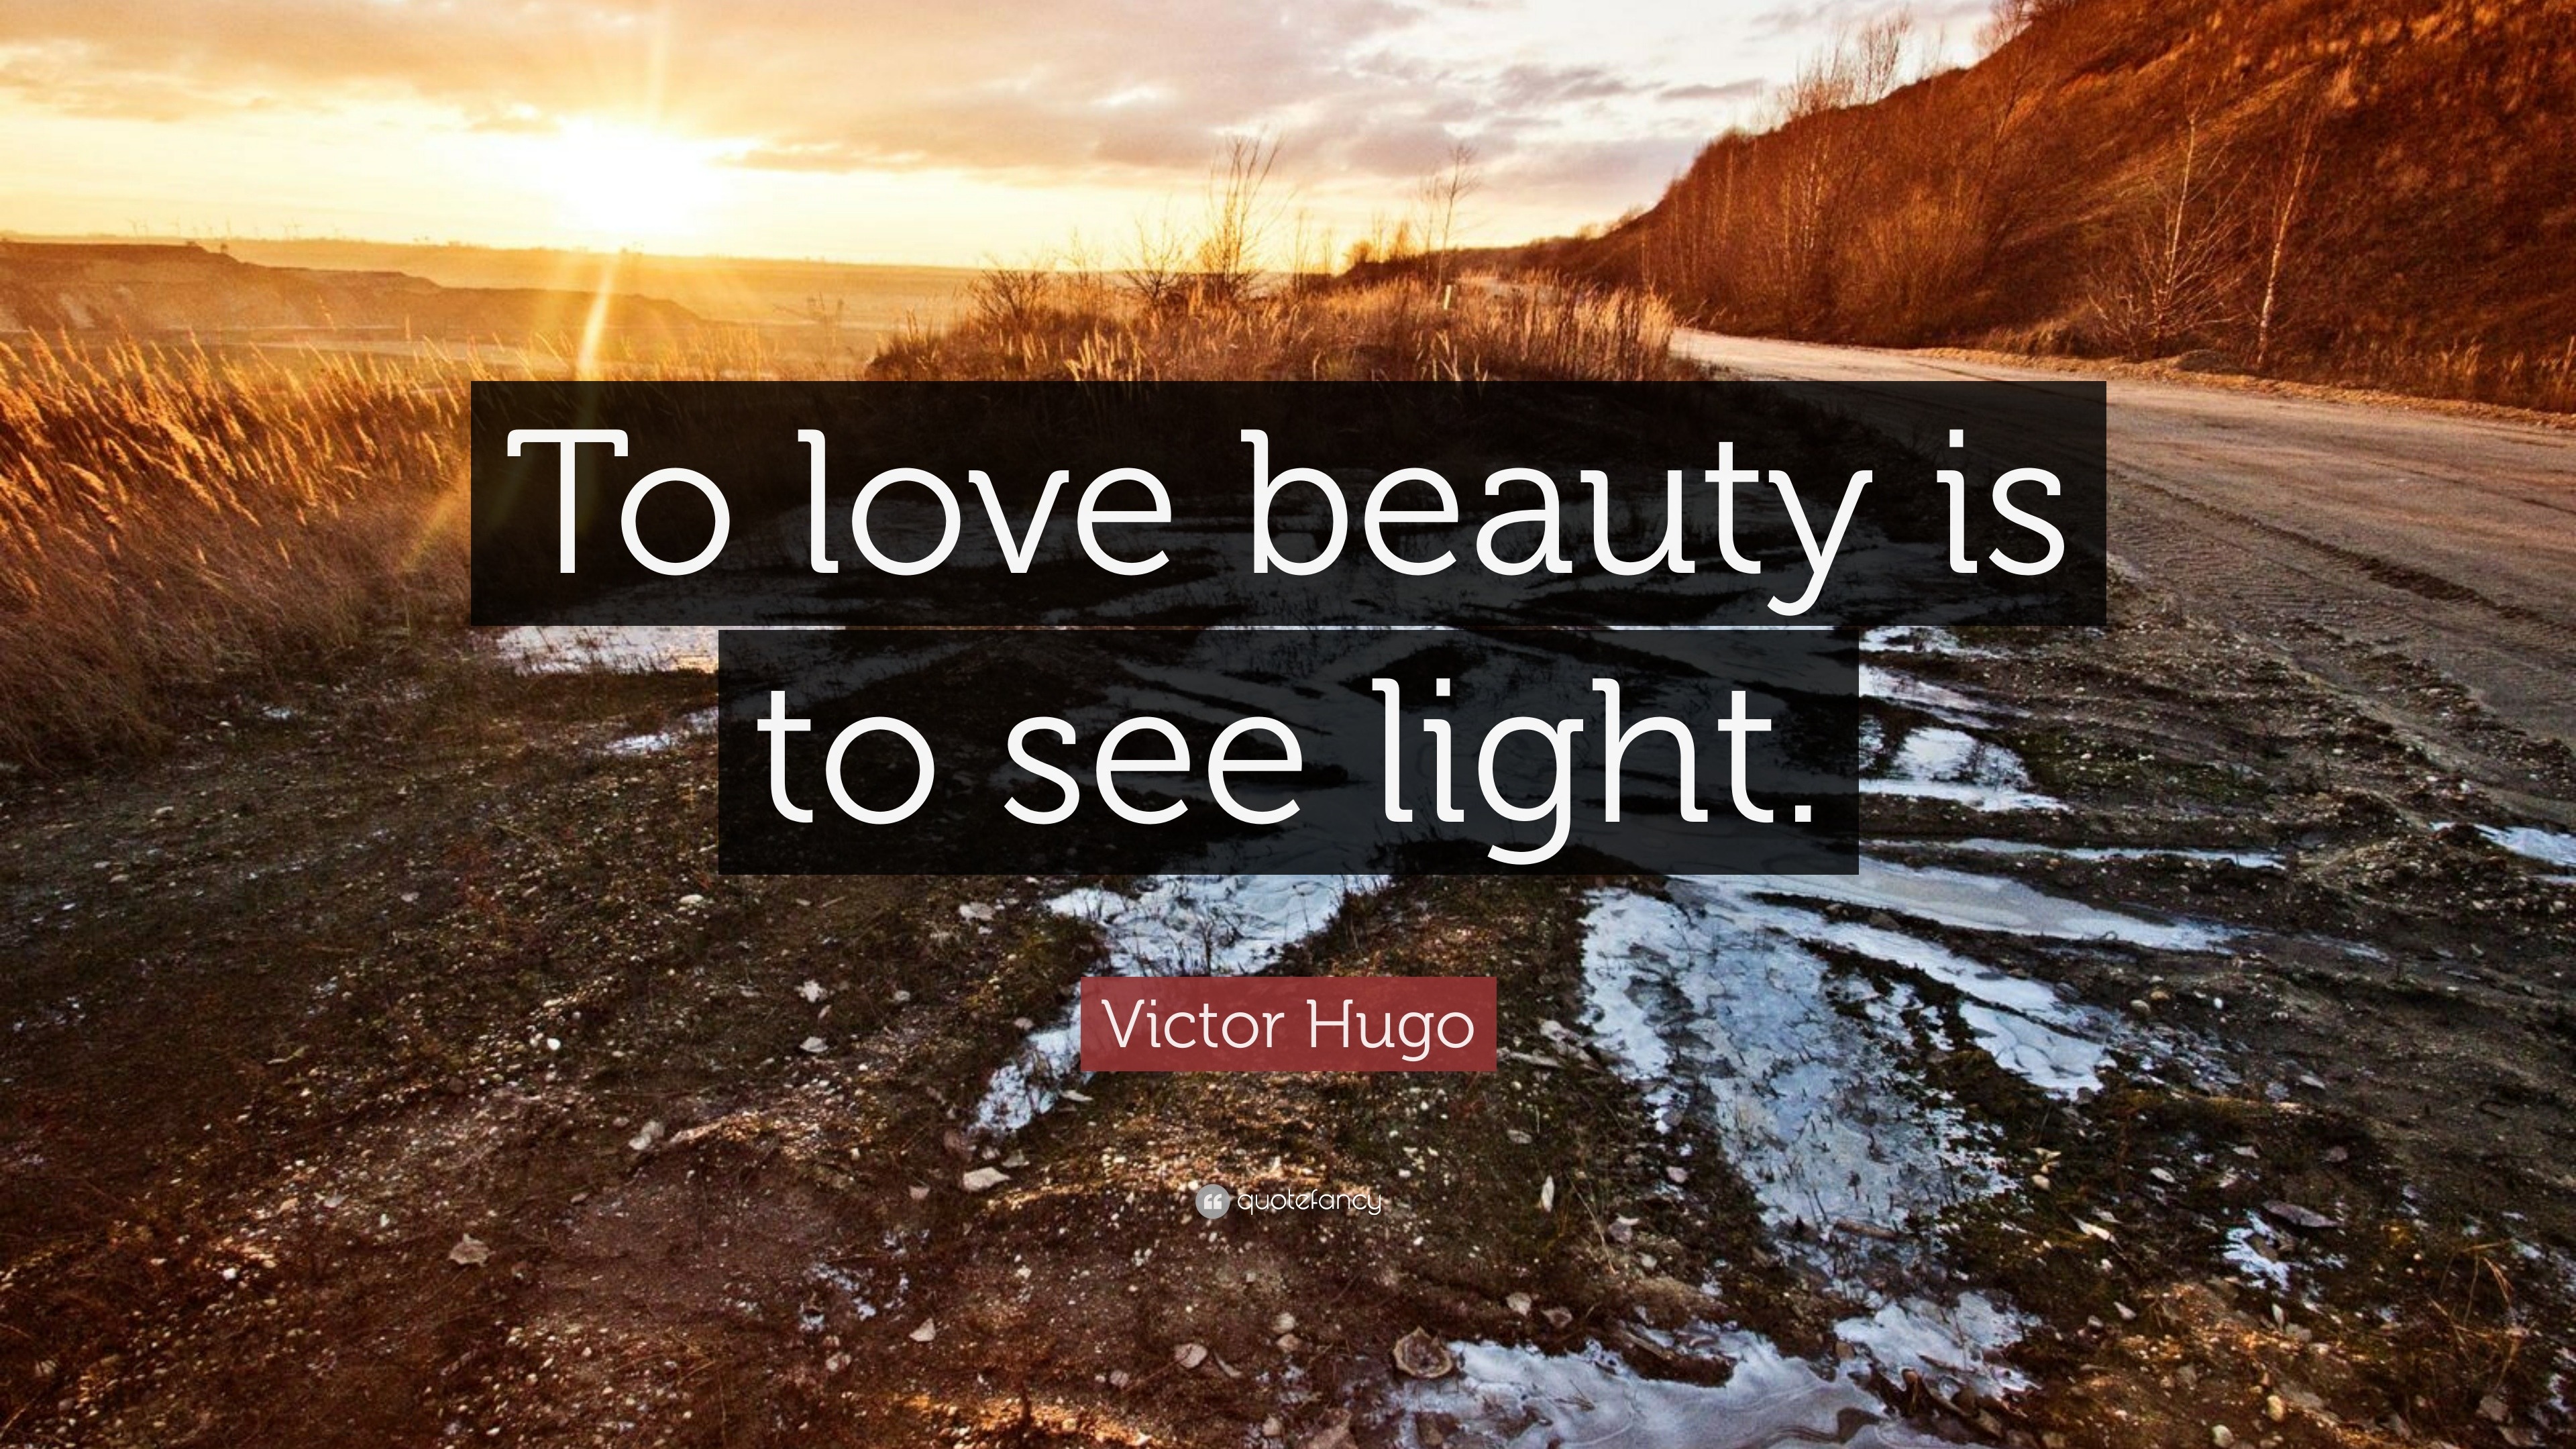 Victor Hugo Quote: “To love beauty is to see light.”